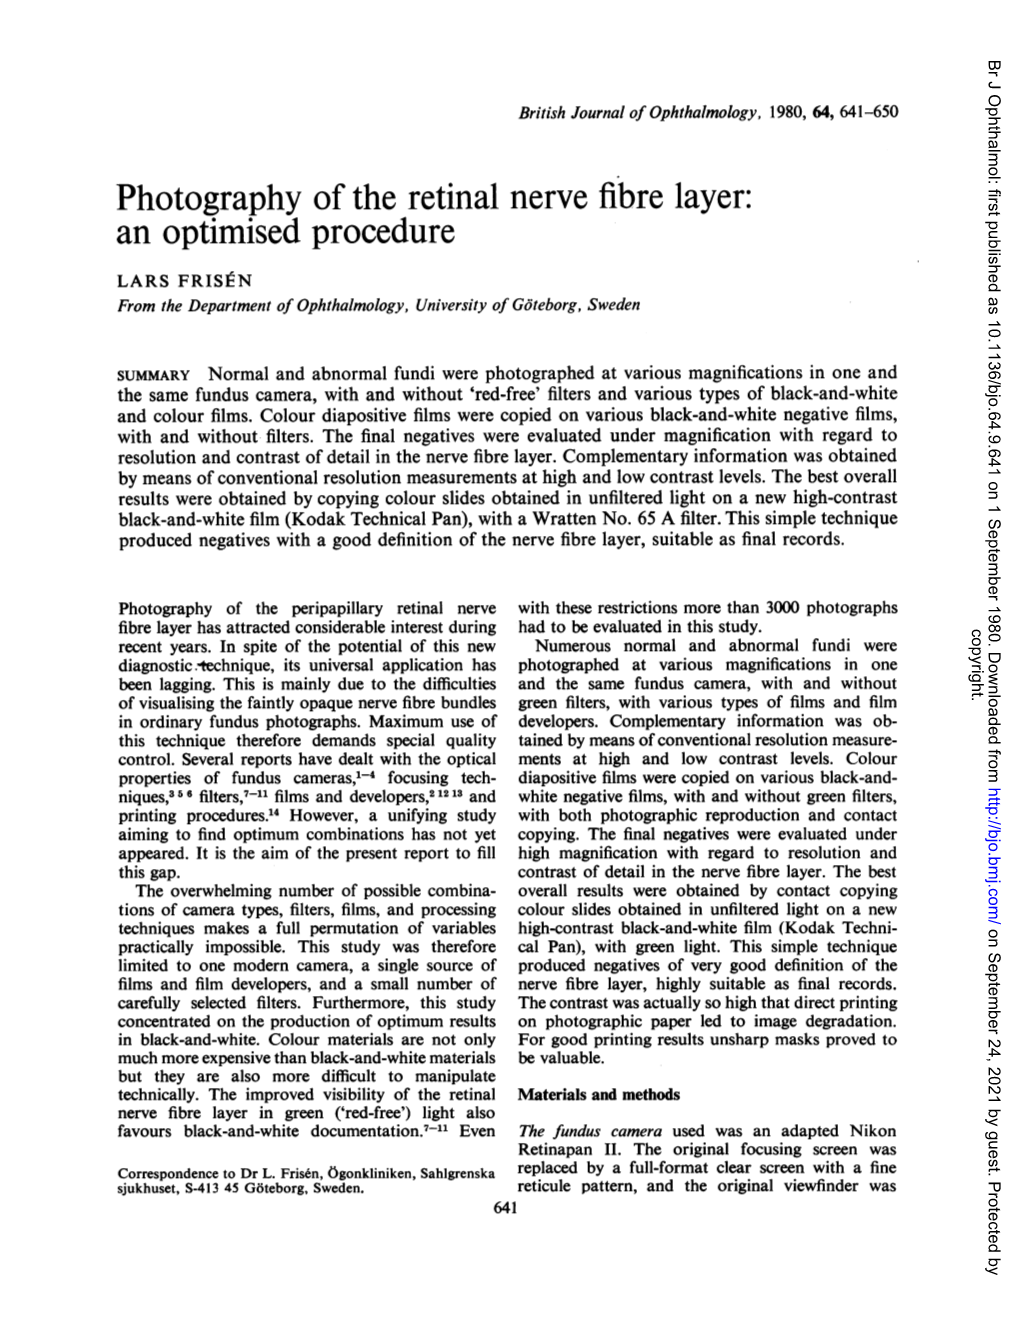 Photography of the Retinal Nerve Fibre Layer: an Optimised Procedure LARS FRISEN from the Department of Ophthalmology, University of Goteborg, Sweden